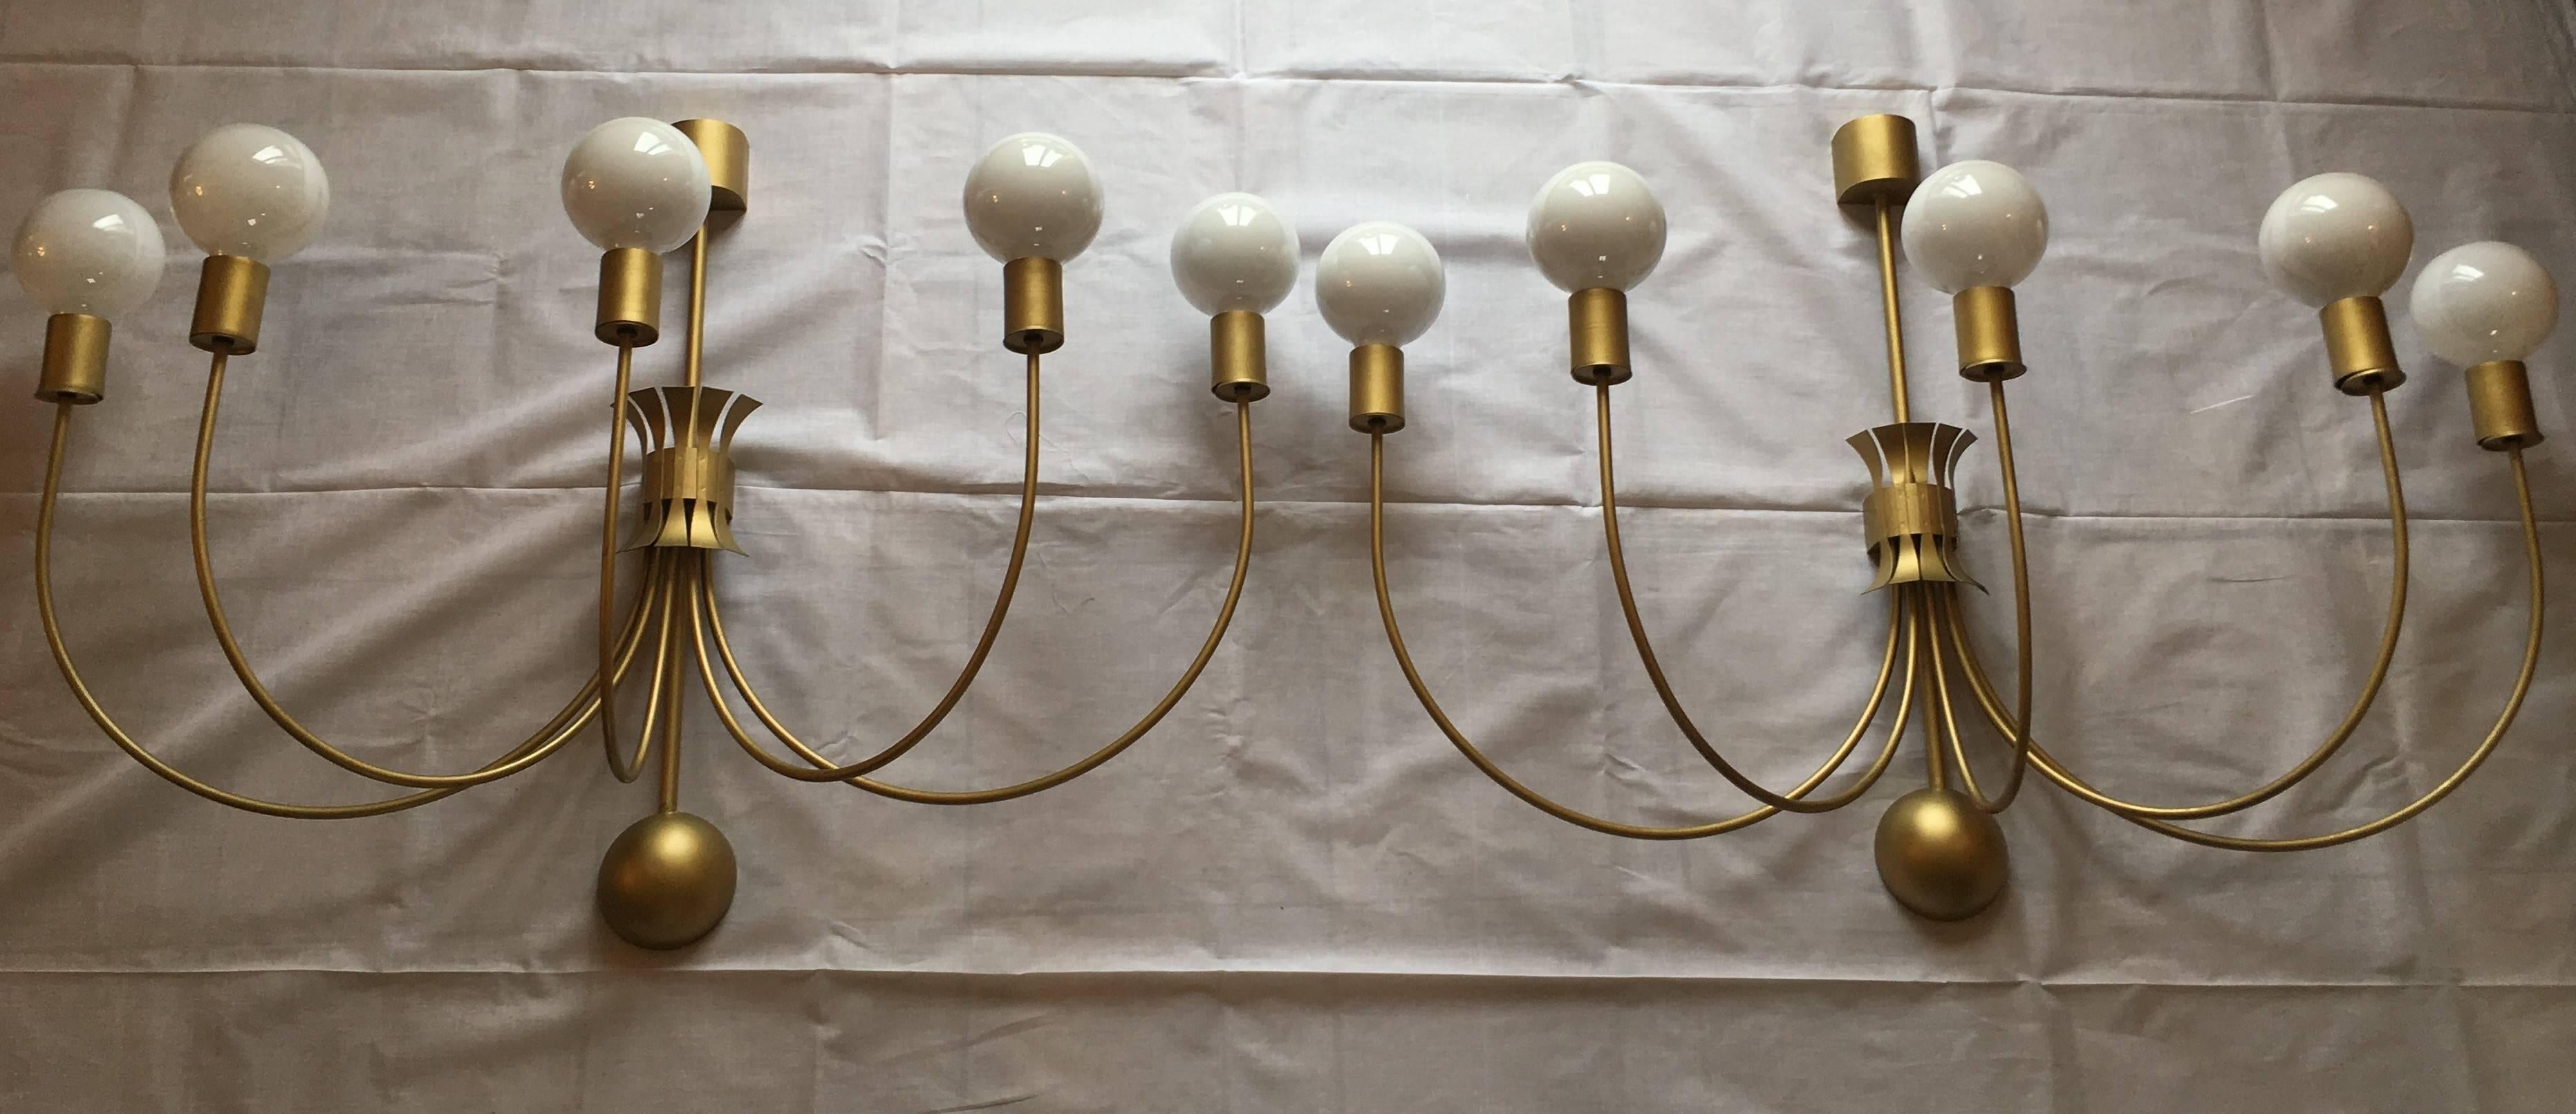 Very rare set of four monumental wall lamps, installed in 1952 in a famous French theatre in Normandy. In the style of Jean Royère, each sconce has five elegant curved arms electrified.
Perfect set to decorate a loft or illuminate large